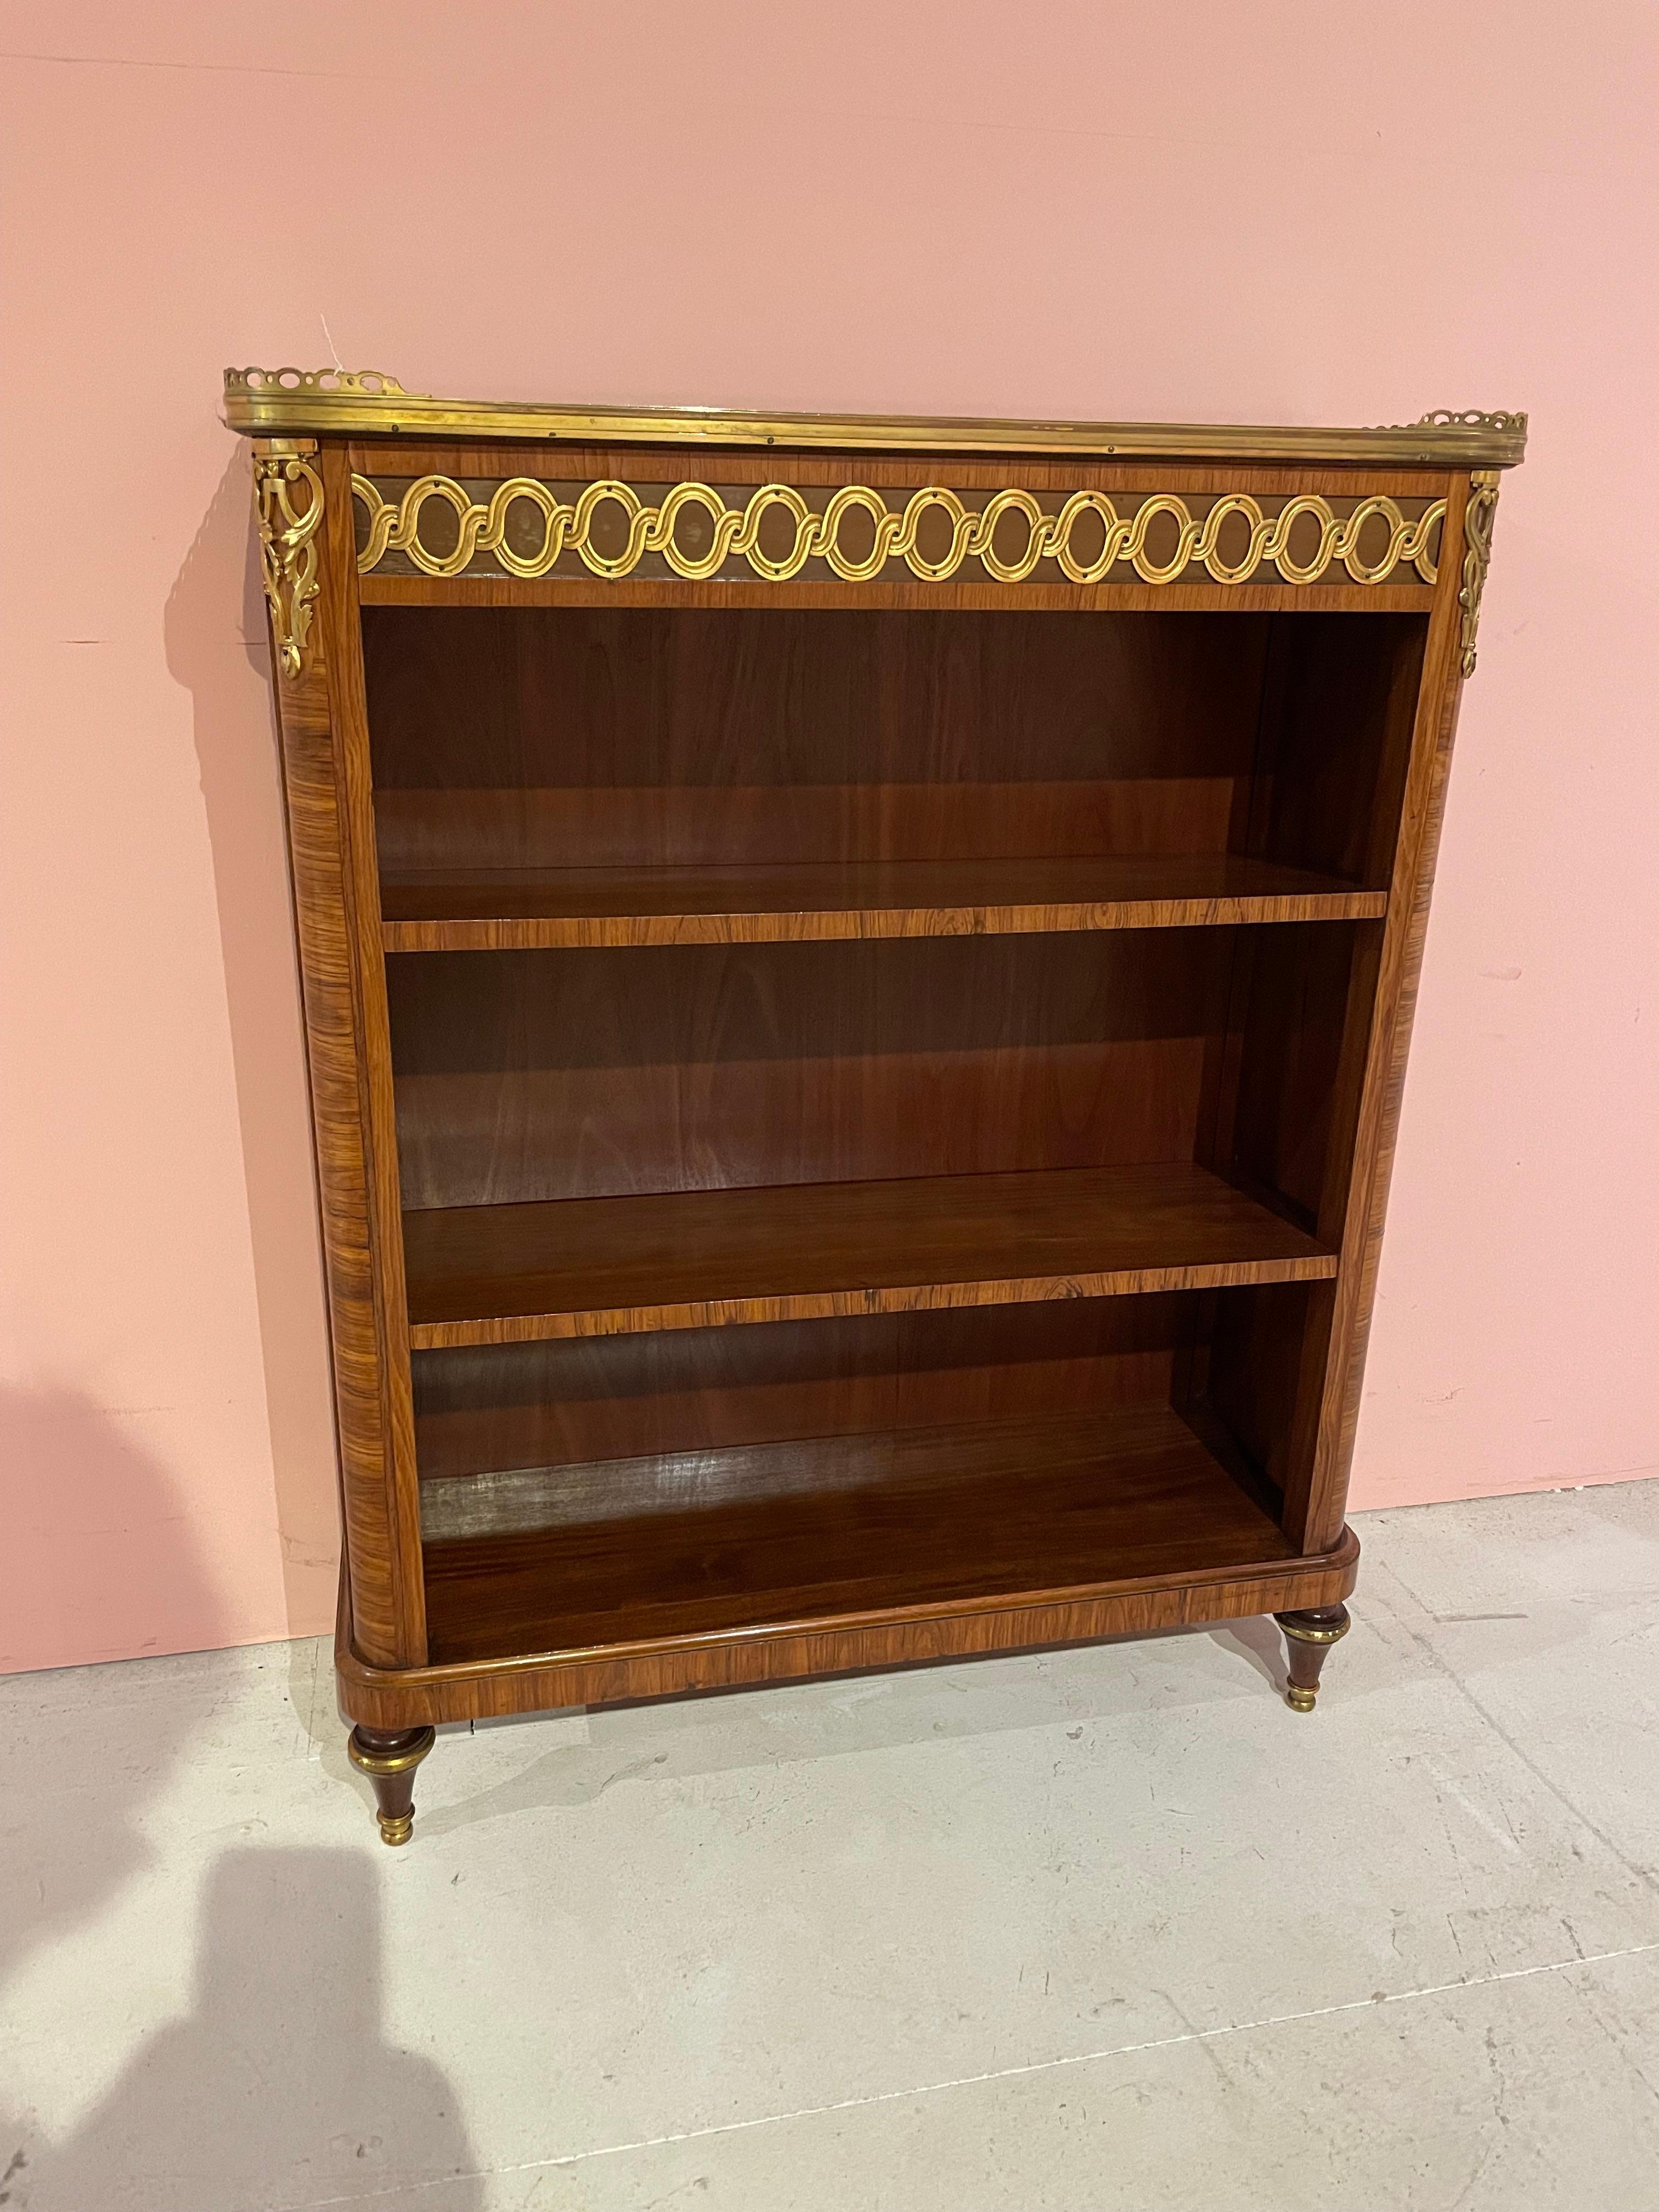 Fabulous quality late 19th century small open bookcase from the Napoleon III period circa 1870’s
Veneered with kingwood , original marble top and ormolu mounts
H: 99 cm (39